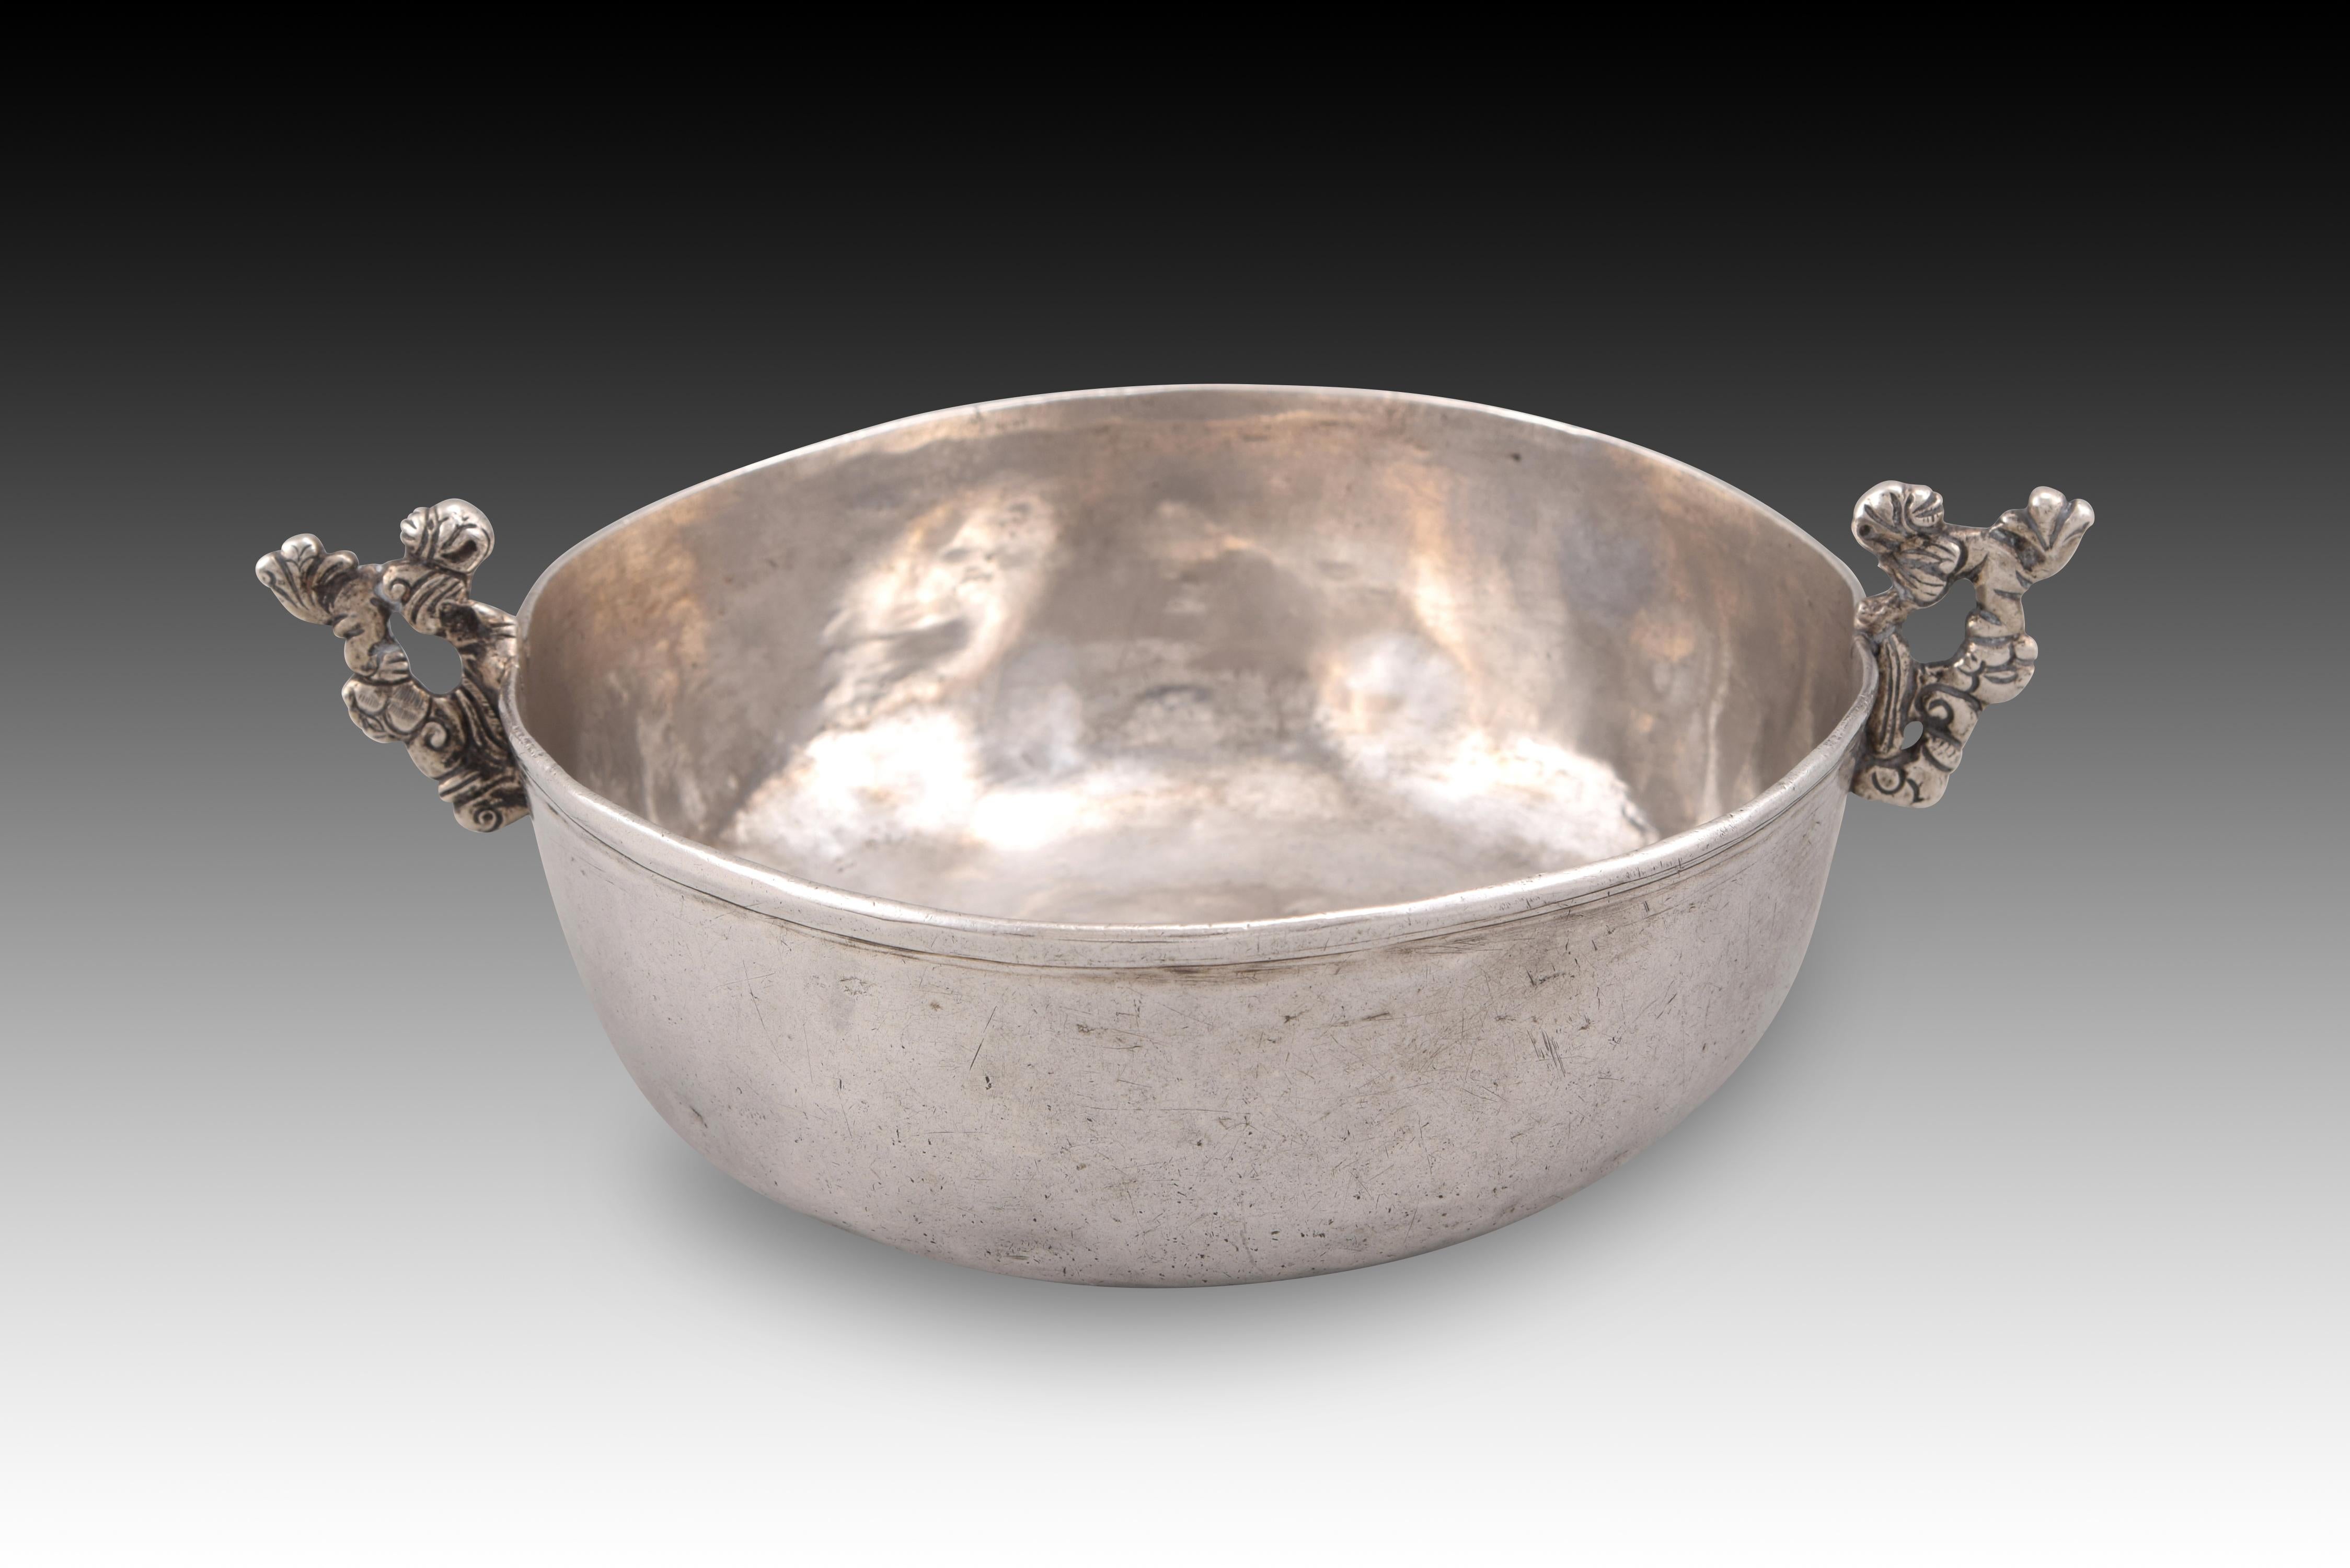 Tembladera or bernegal with property inscription. Possibly Spanish American, 18th century. 
Silver trembling dish in its color with a wide and circular base and a mouth of greater diameter than this, body with a fine line engraved towards the edge